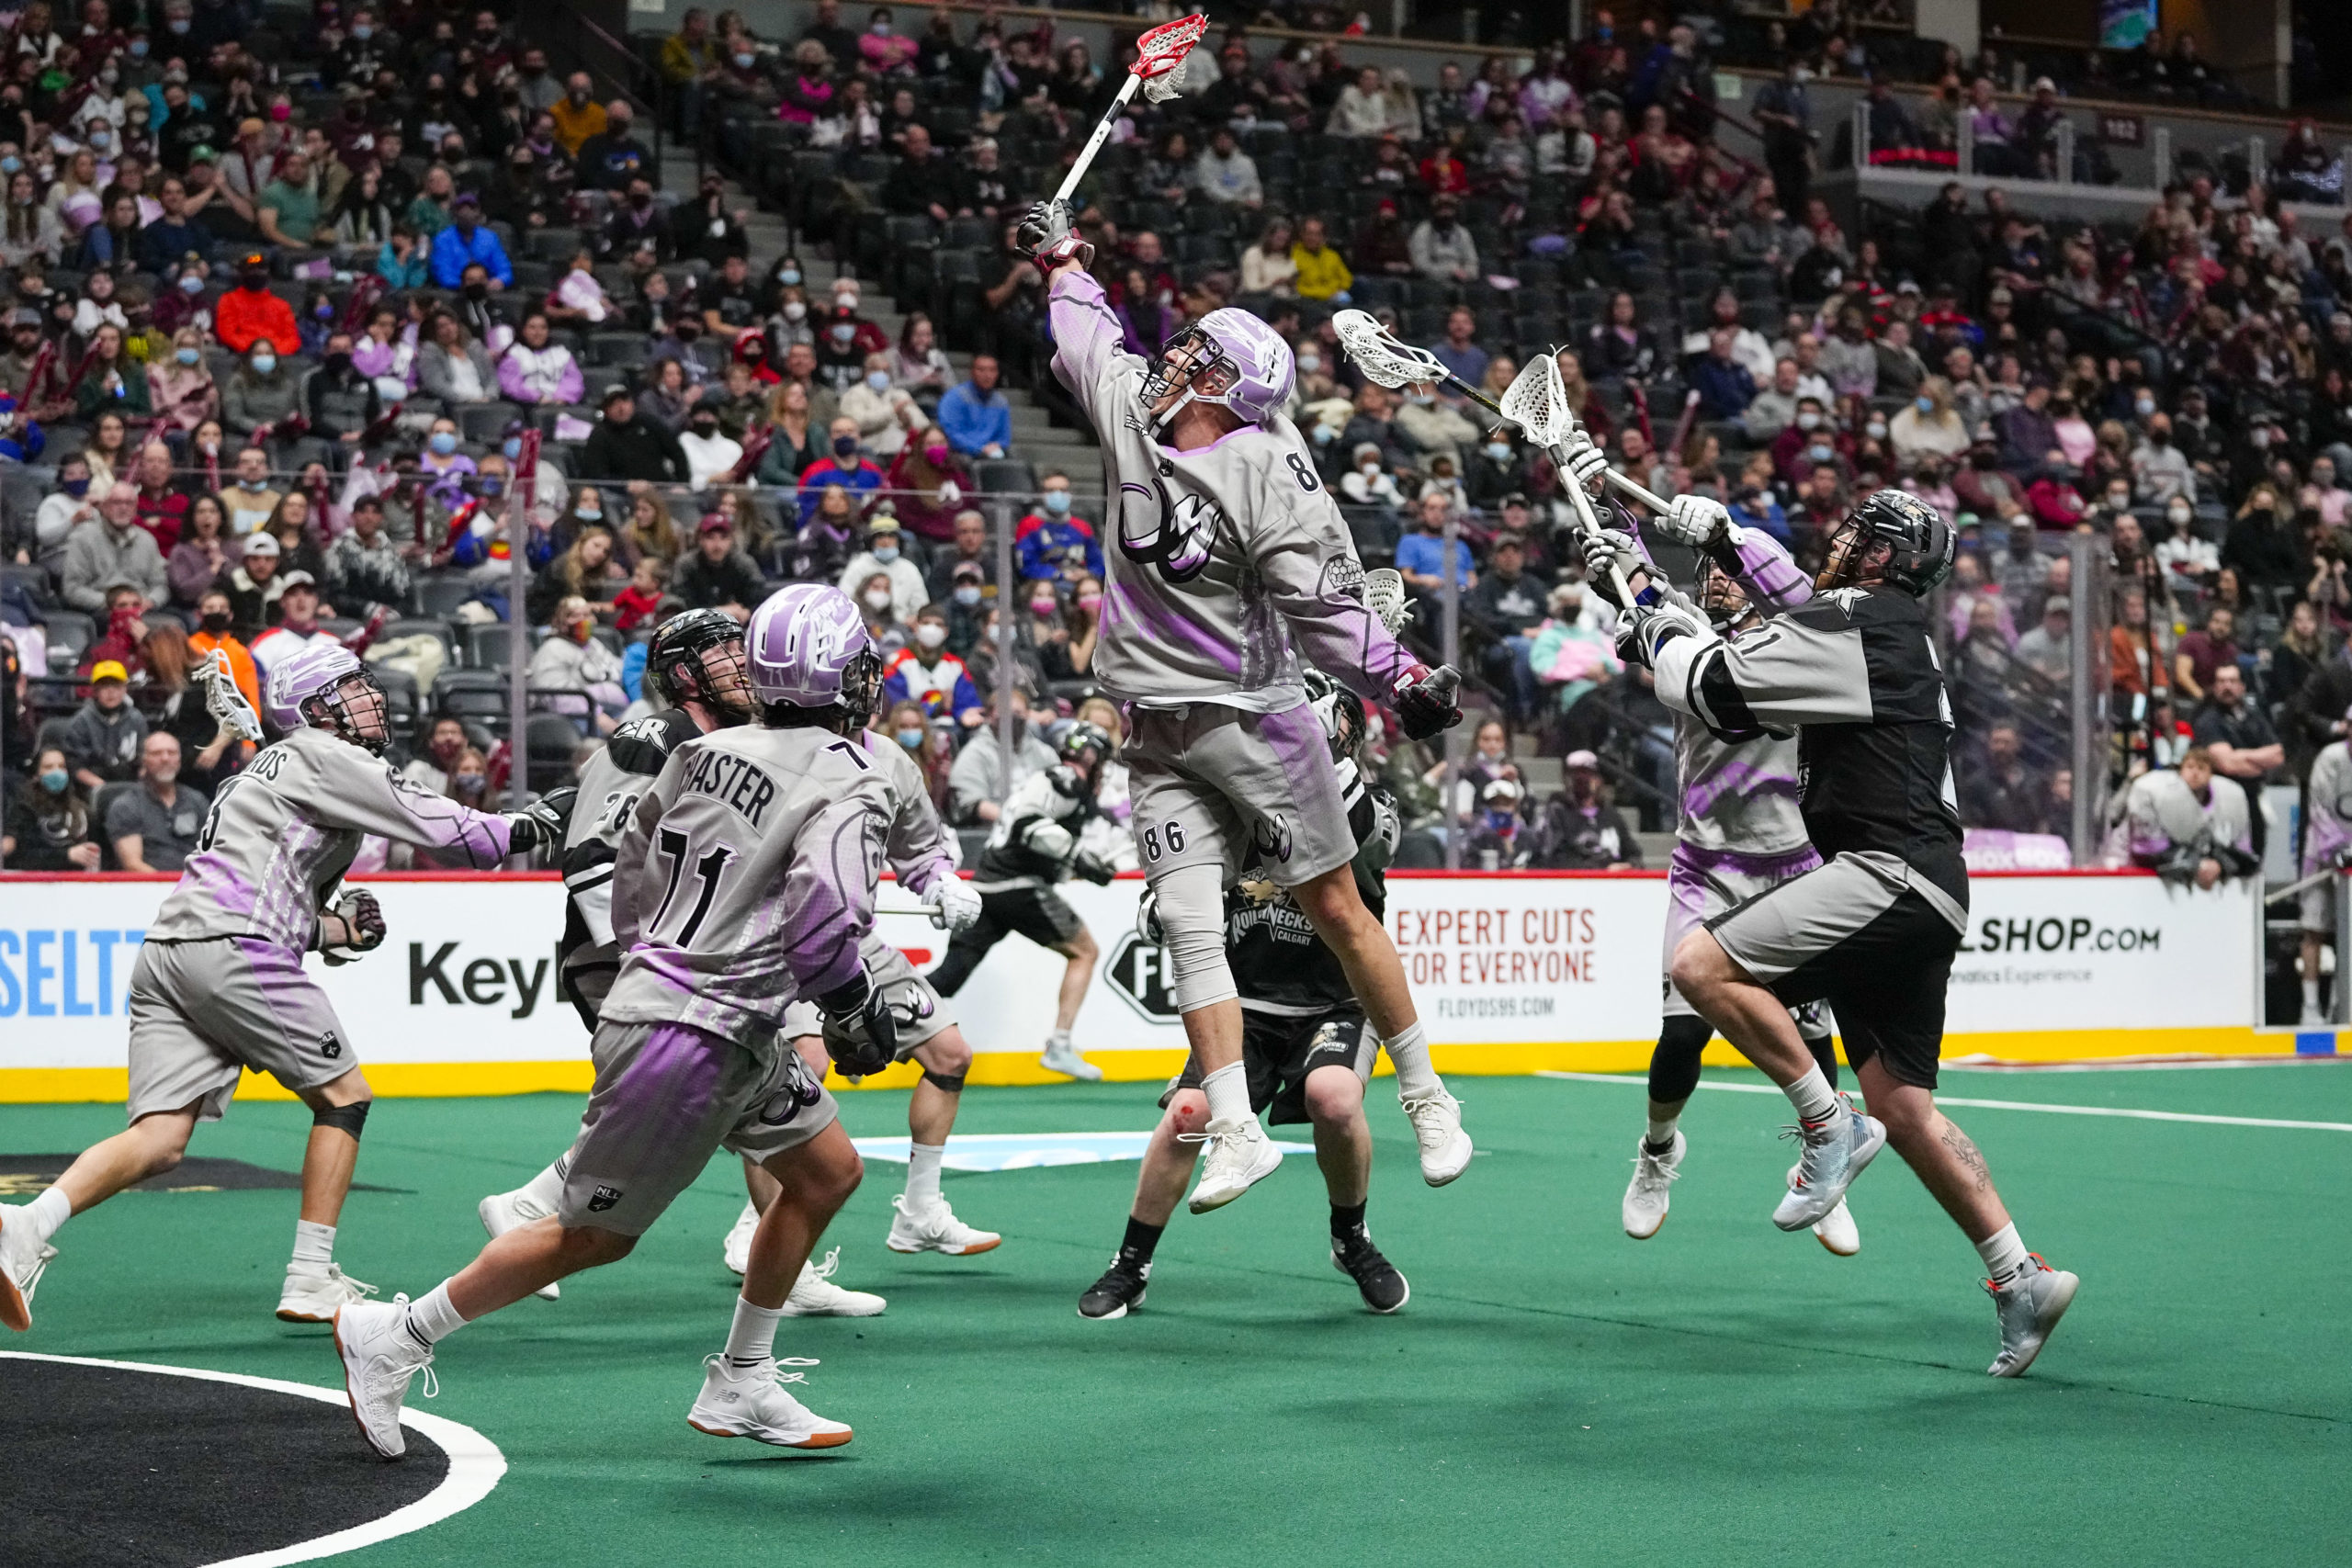 Colorado Captures FourthConsecutive Victory as Mammoth Lacrosse Out